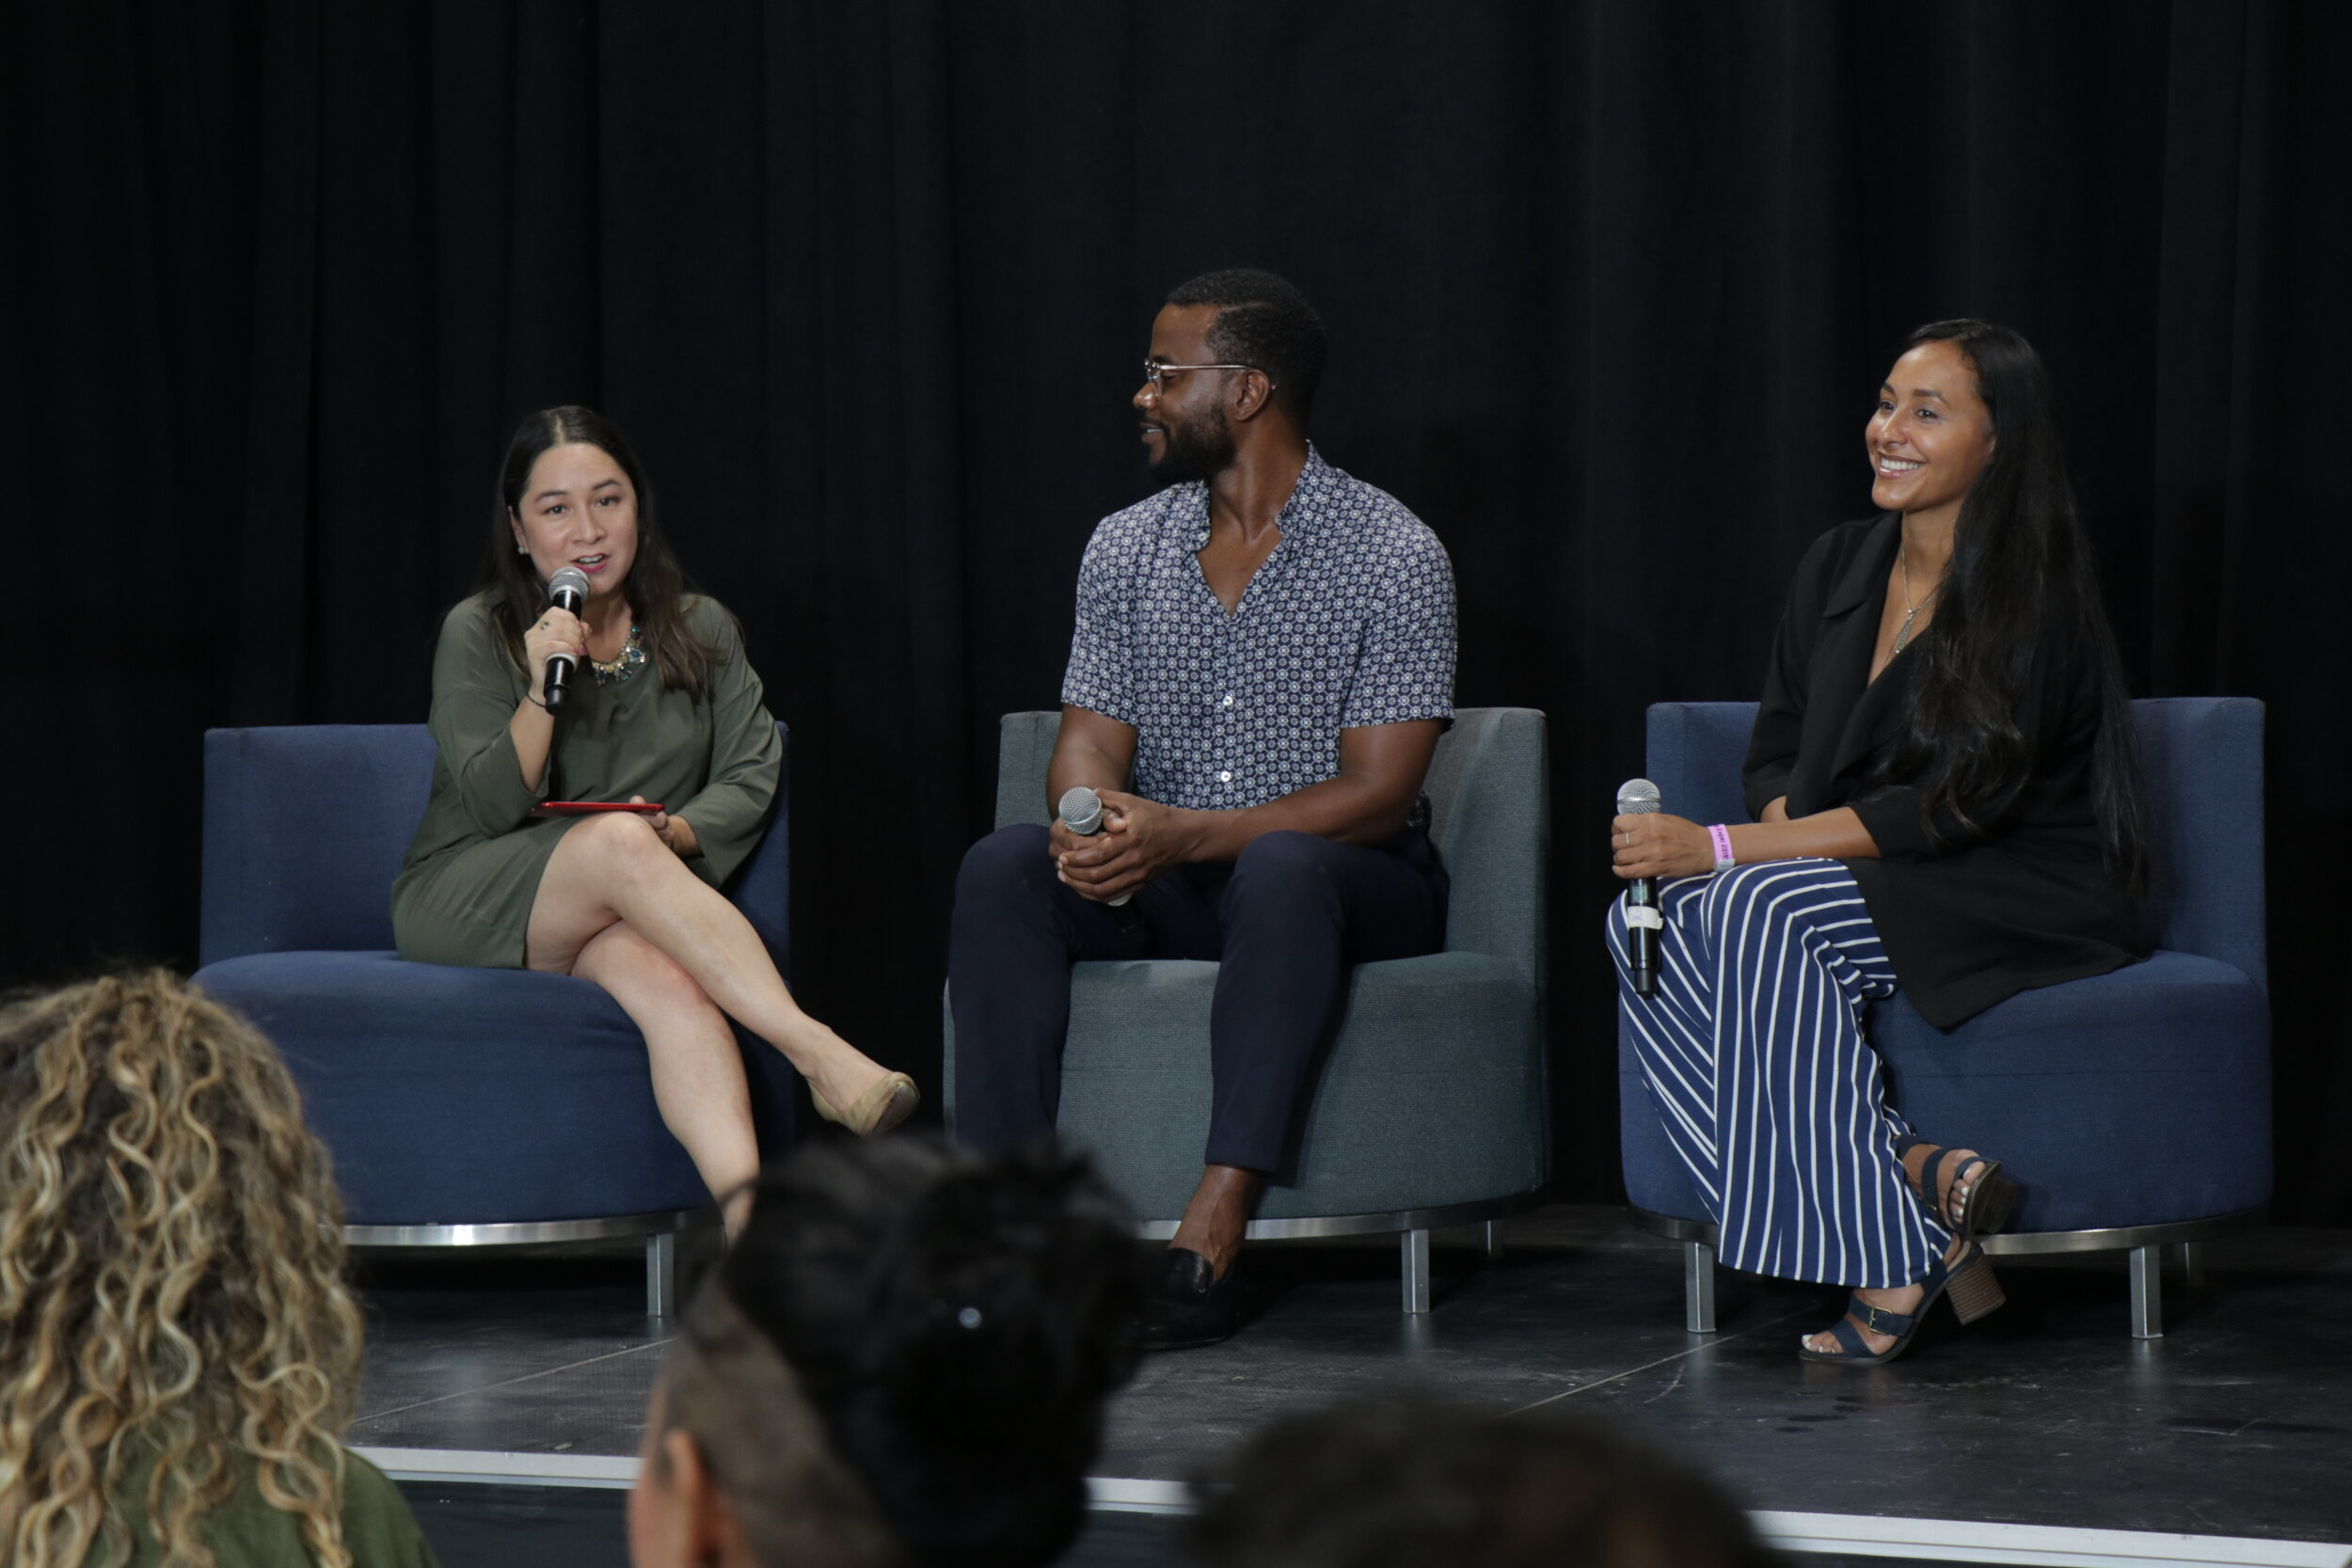   Moderator at 2019 Latina Expo about Economic Equity in Cannabis IL Industry  